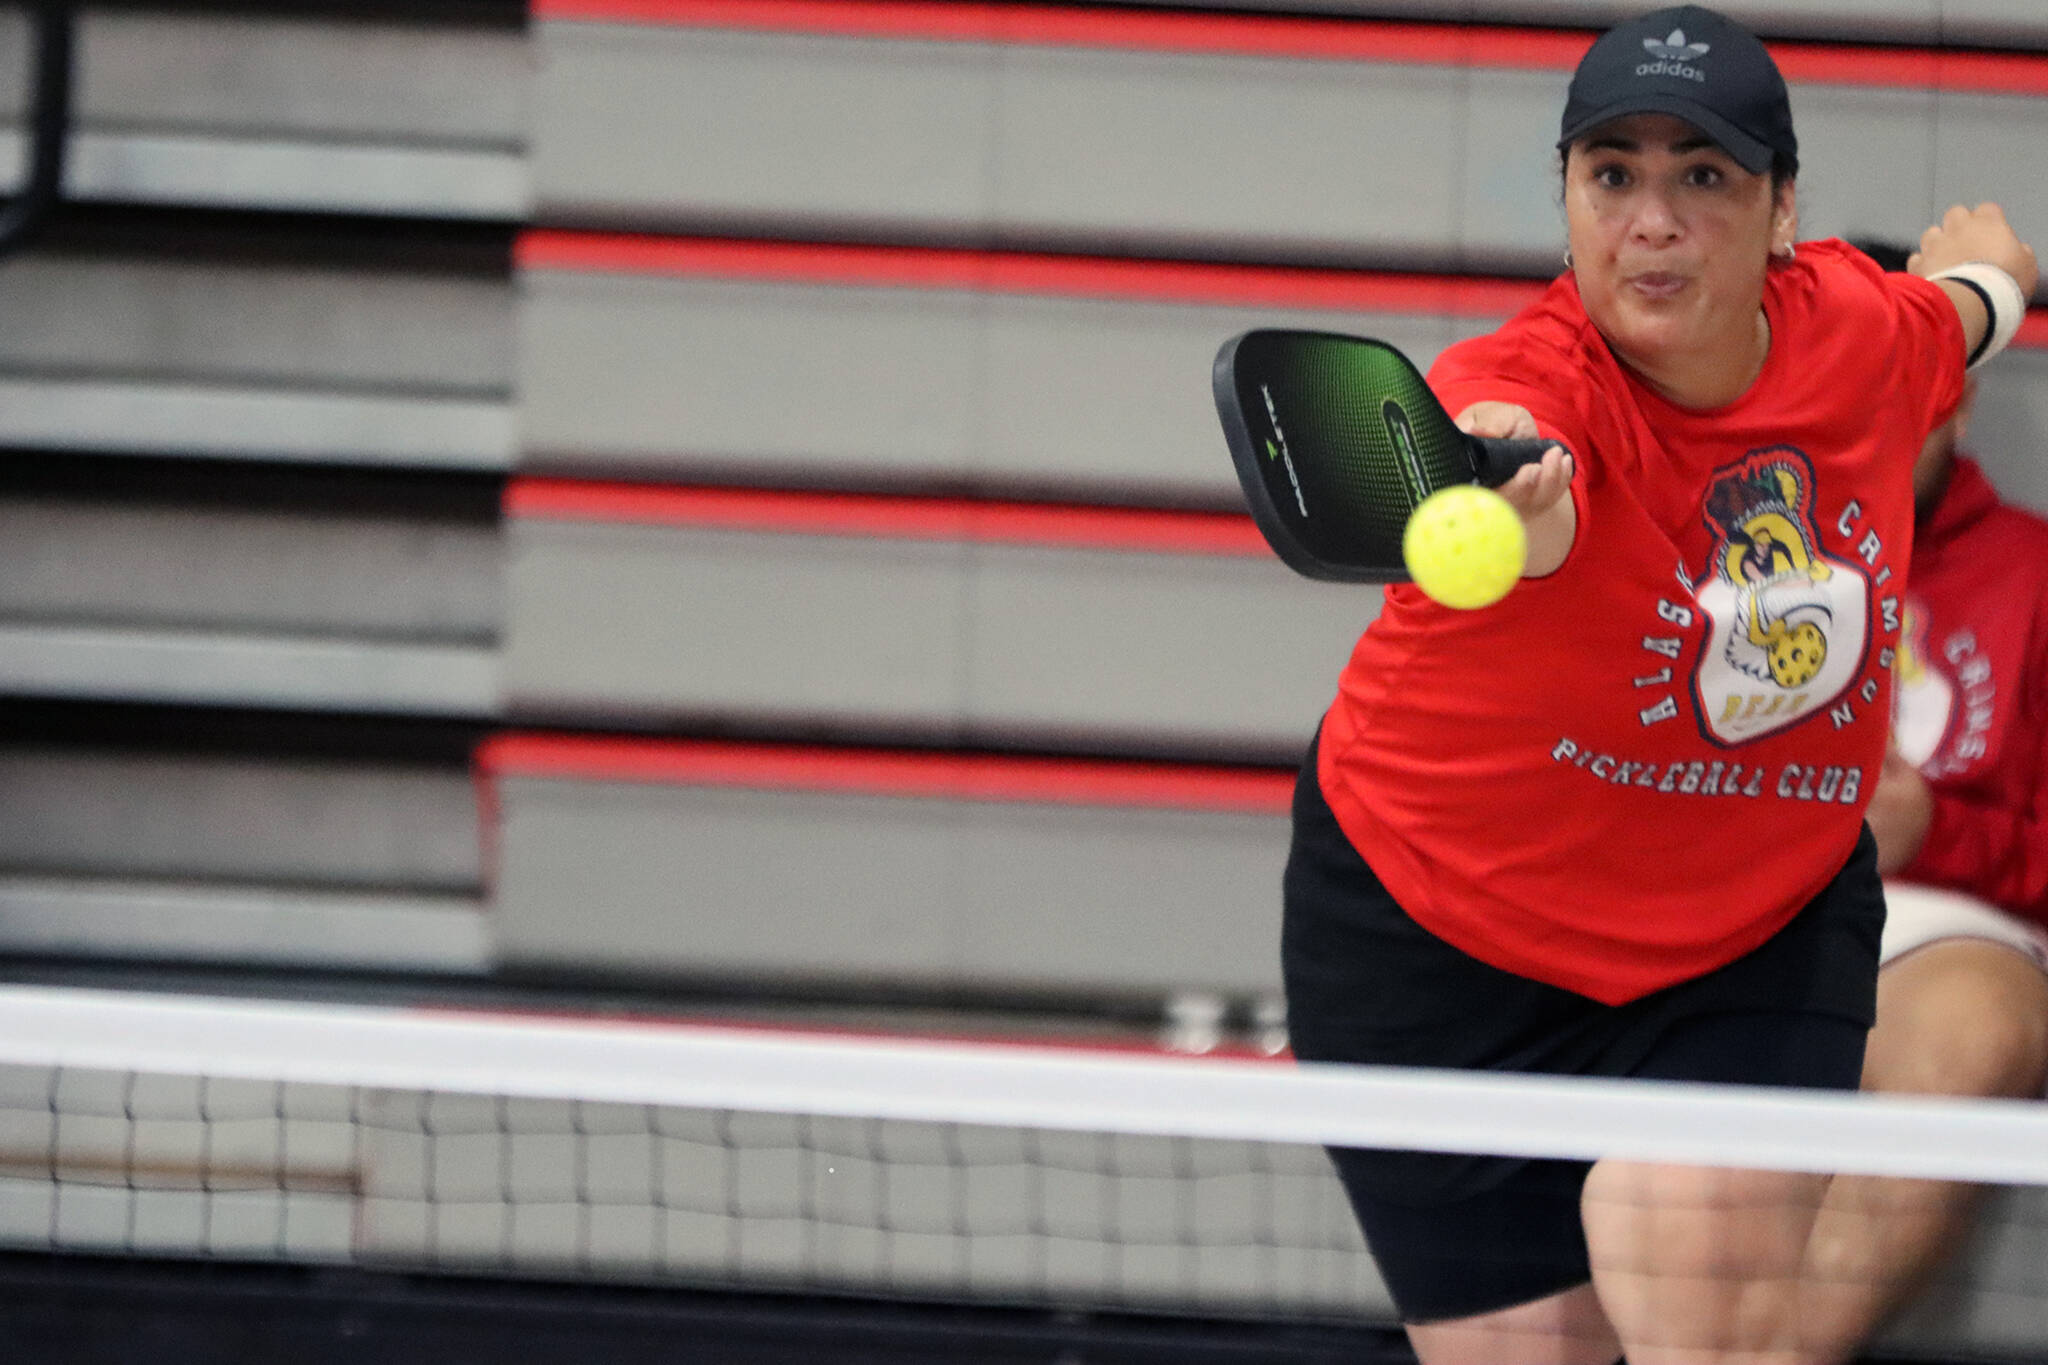 Mele Maake extends to reach a pickleball during the intermediate mixed bracket championship Saturday at Floyd Dryden Middle School. Maake, a member of the Alaska Crimson Bear Pickleball Club, was one half of two first-place teams. (Ben Hohenstatt / Juneau Empire)